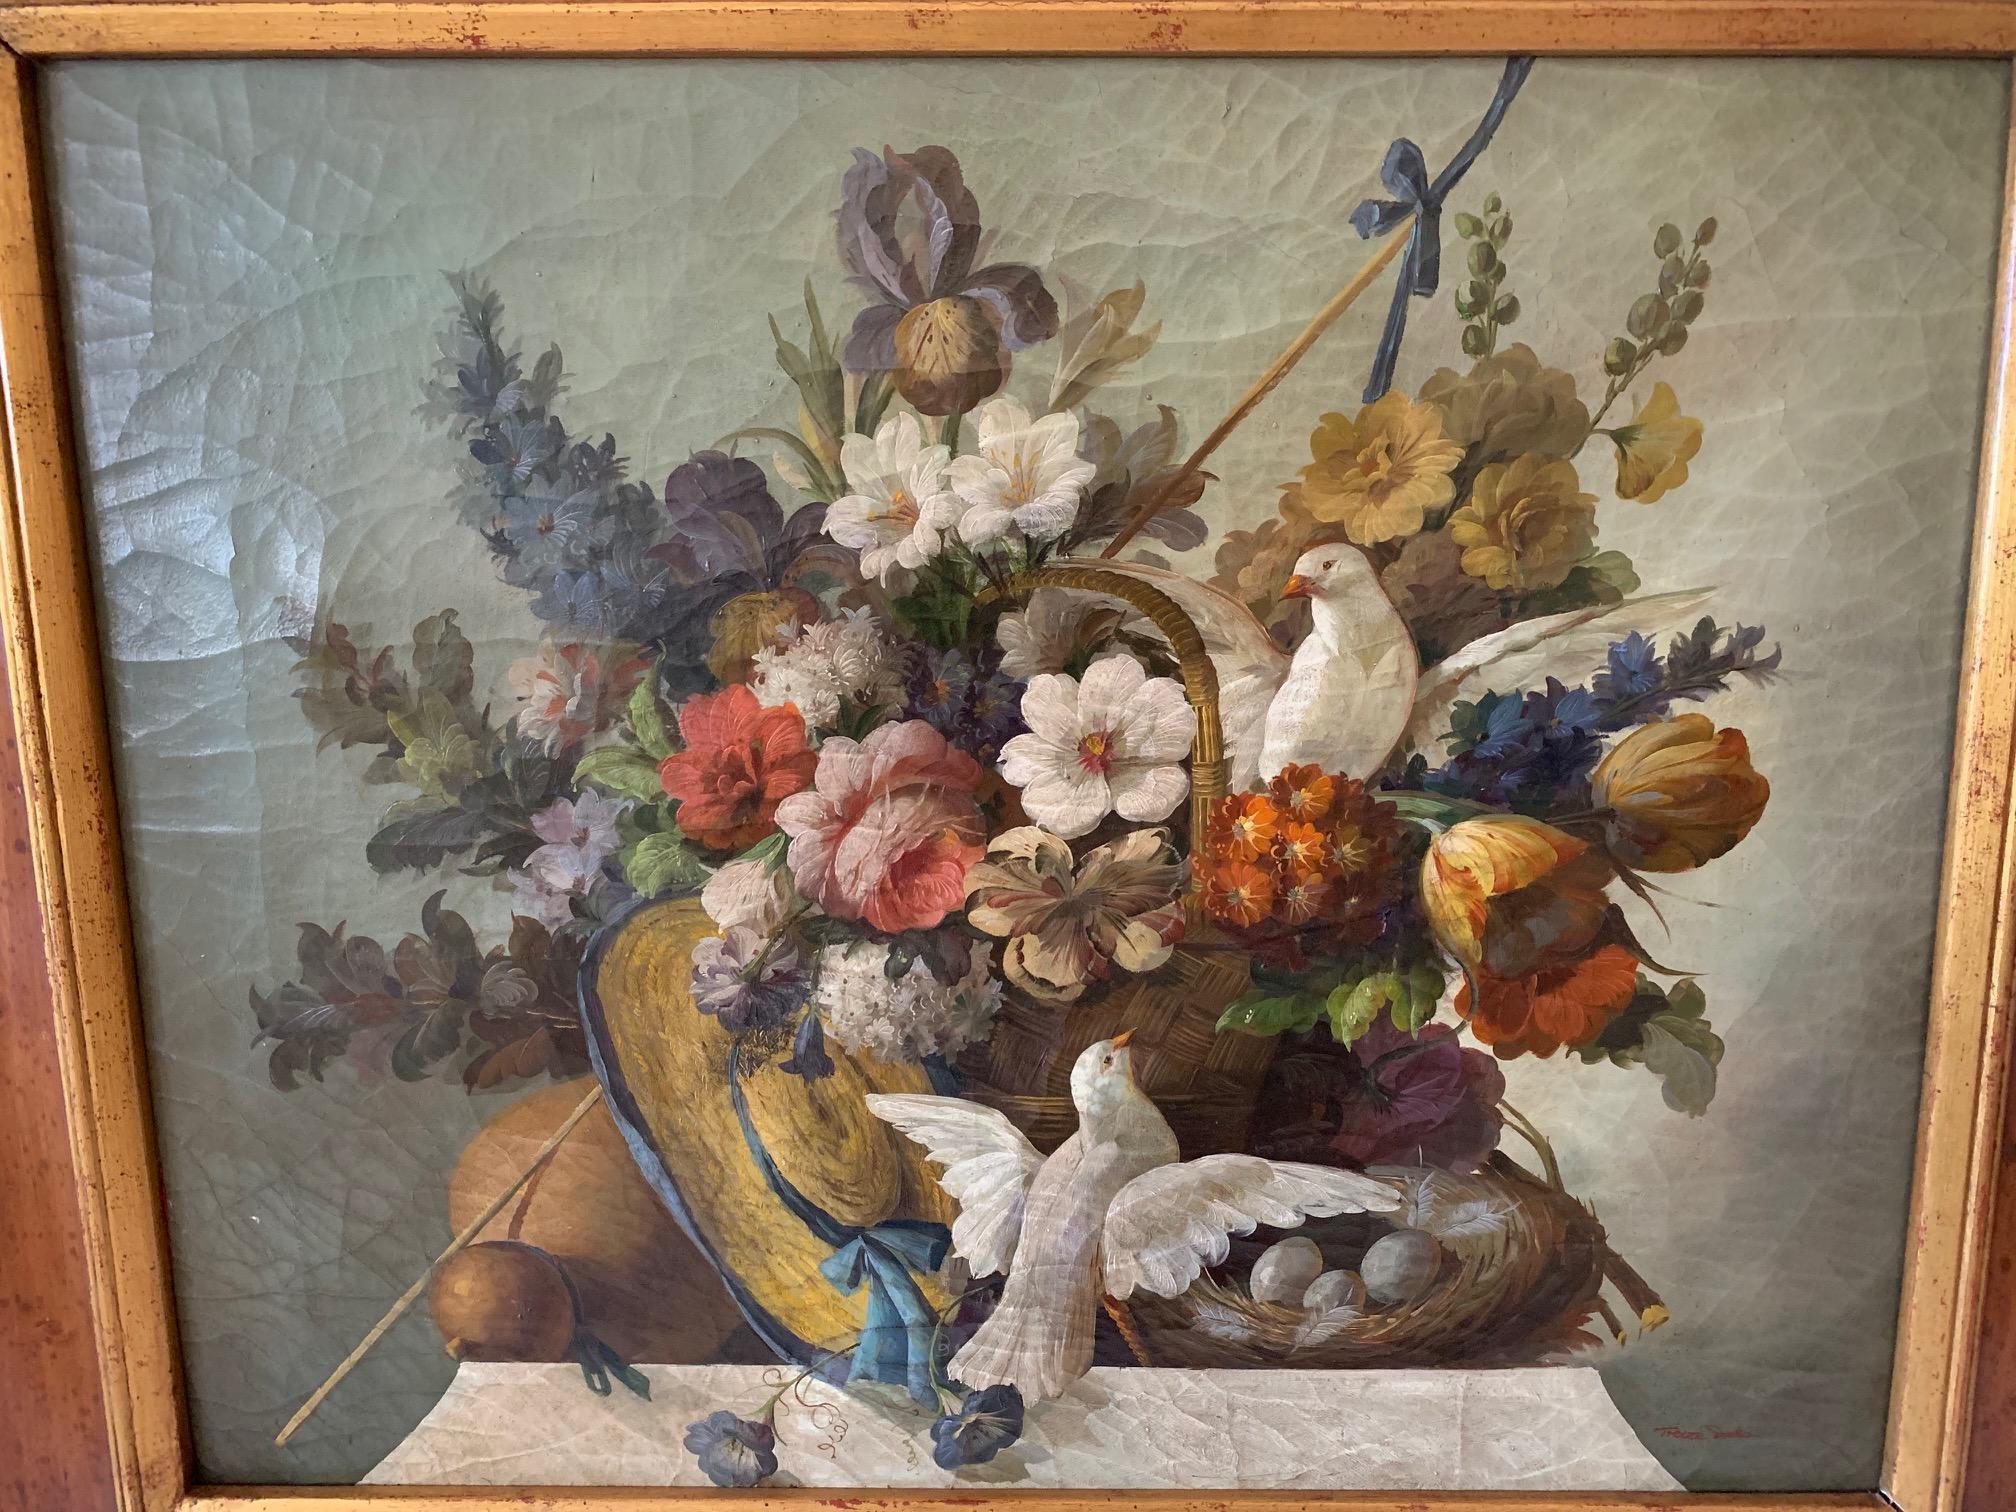 A striking warmly toned still life of flowers and white doves with wonderful craquelure surface and beautiful 5.5 inch wide oak frame with gilded interior around the painting.
Signed Trever S?
 